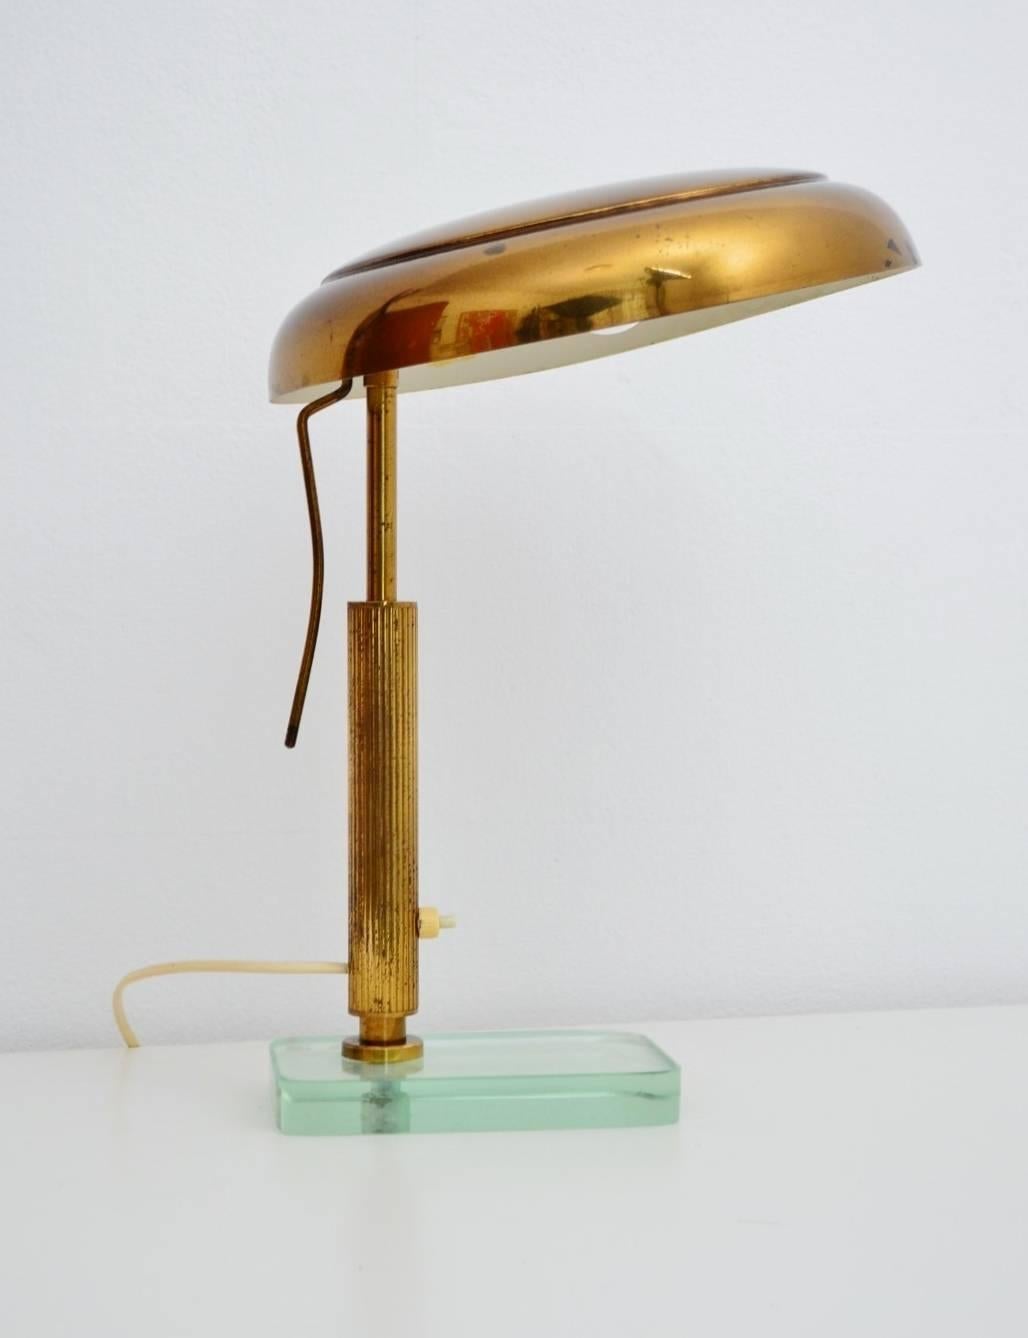 A very stylish and elegant desk or table lamp, made in the typical style of Fontana Arte : brass with glass foot of the Italian's, 1950s.
All brass parts are made of full brass (not brass sheet) and show a fantastic dark patina of the years with